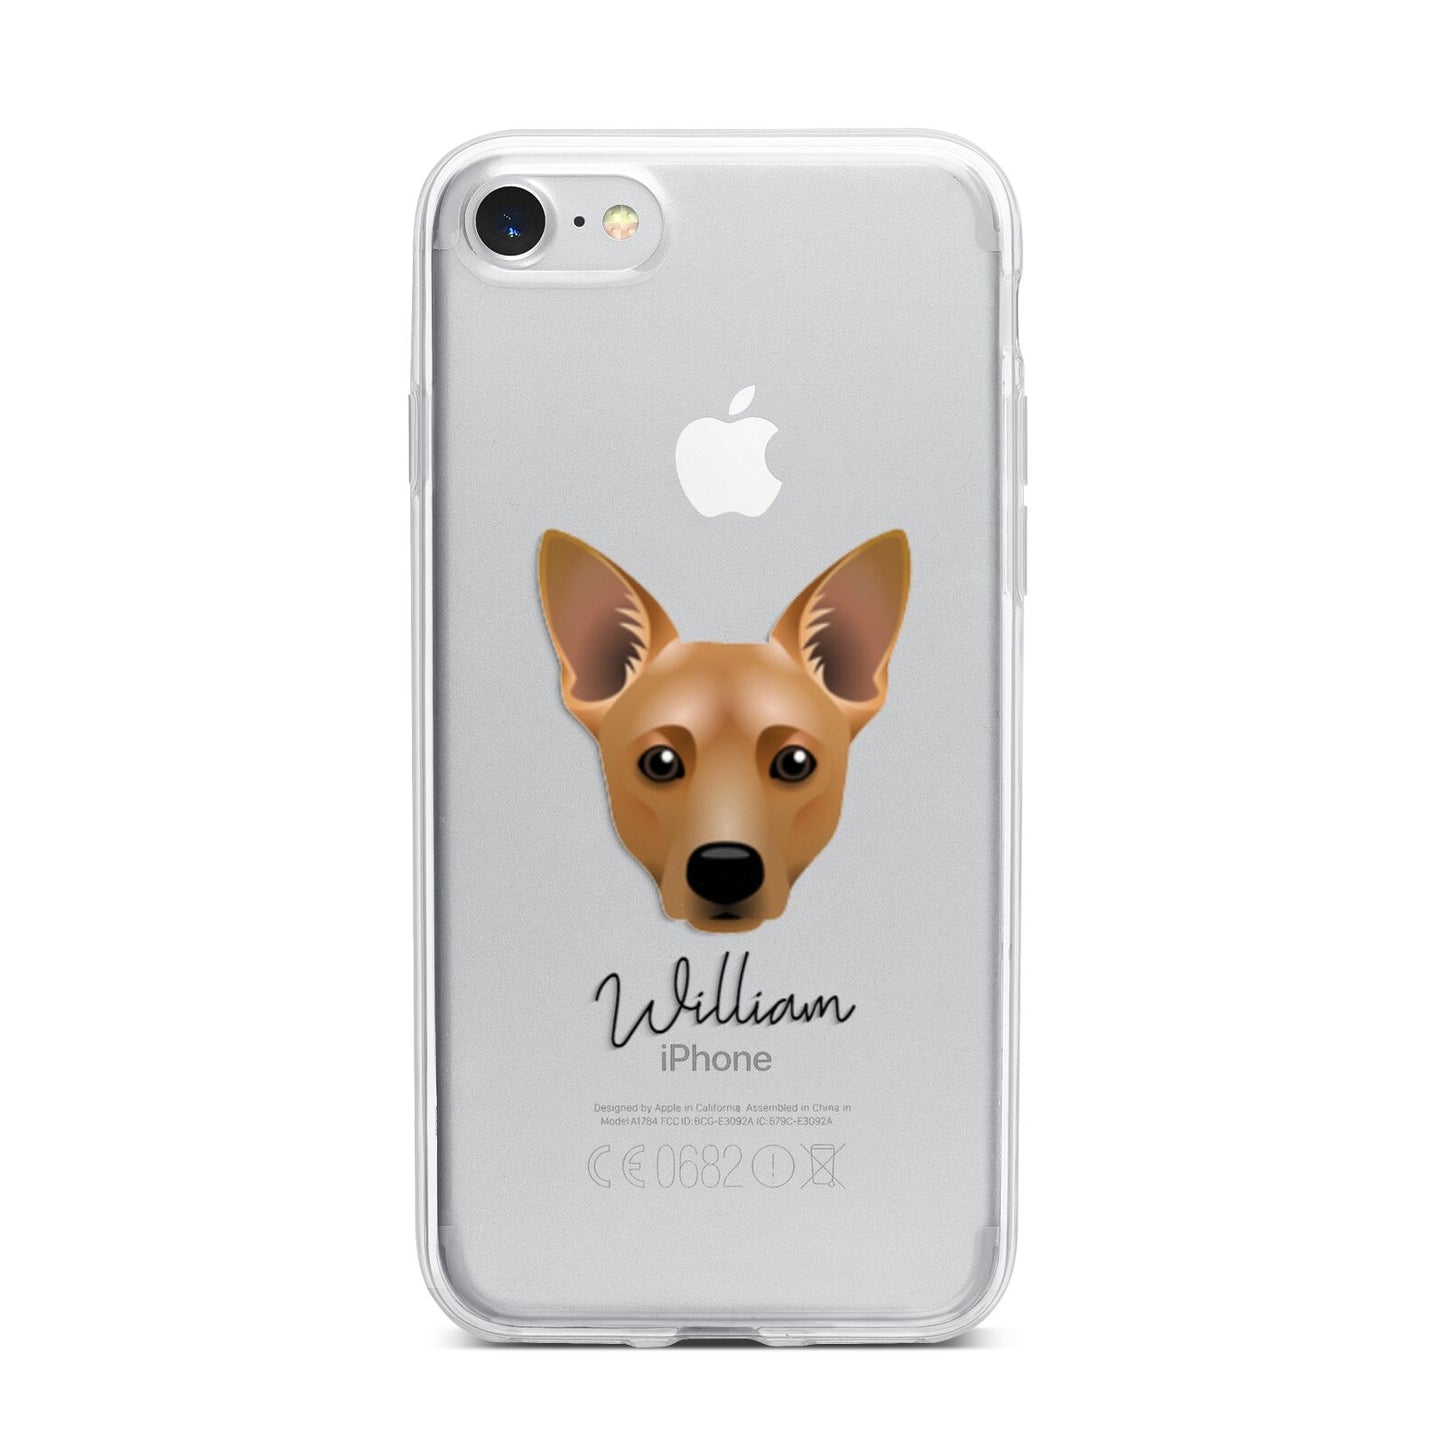 Cojack Personalised iPhone 7 Bumper Case on Silver iPhone